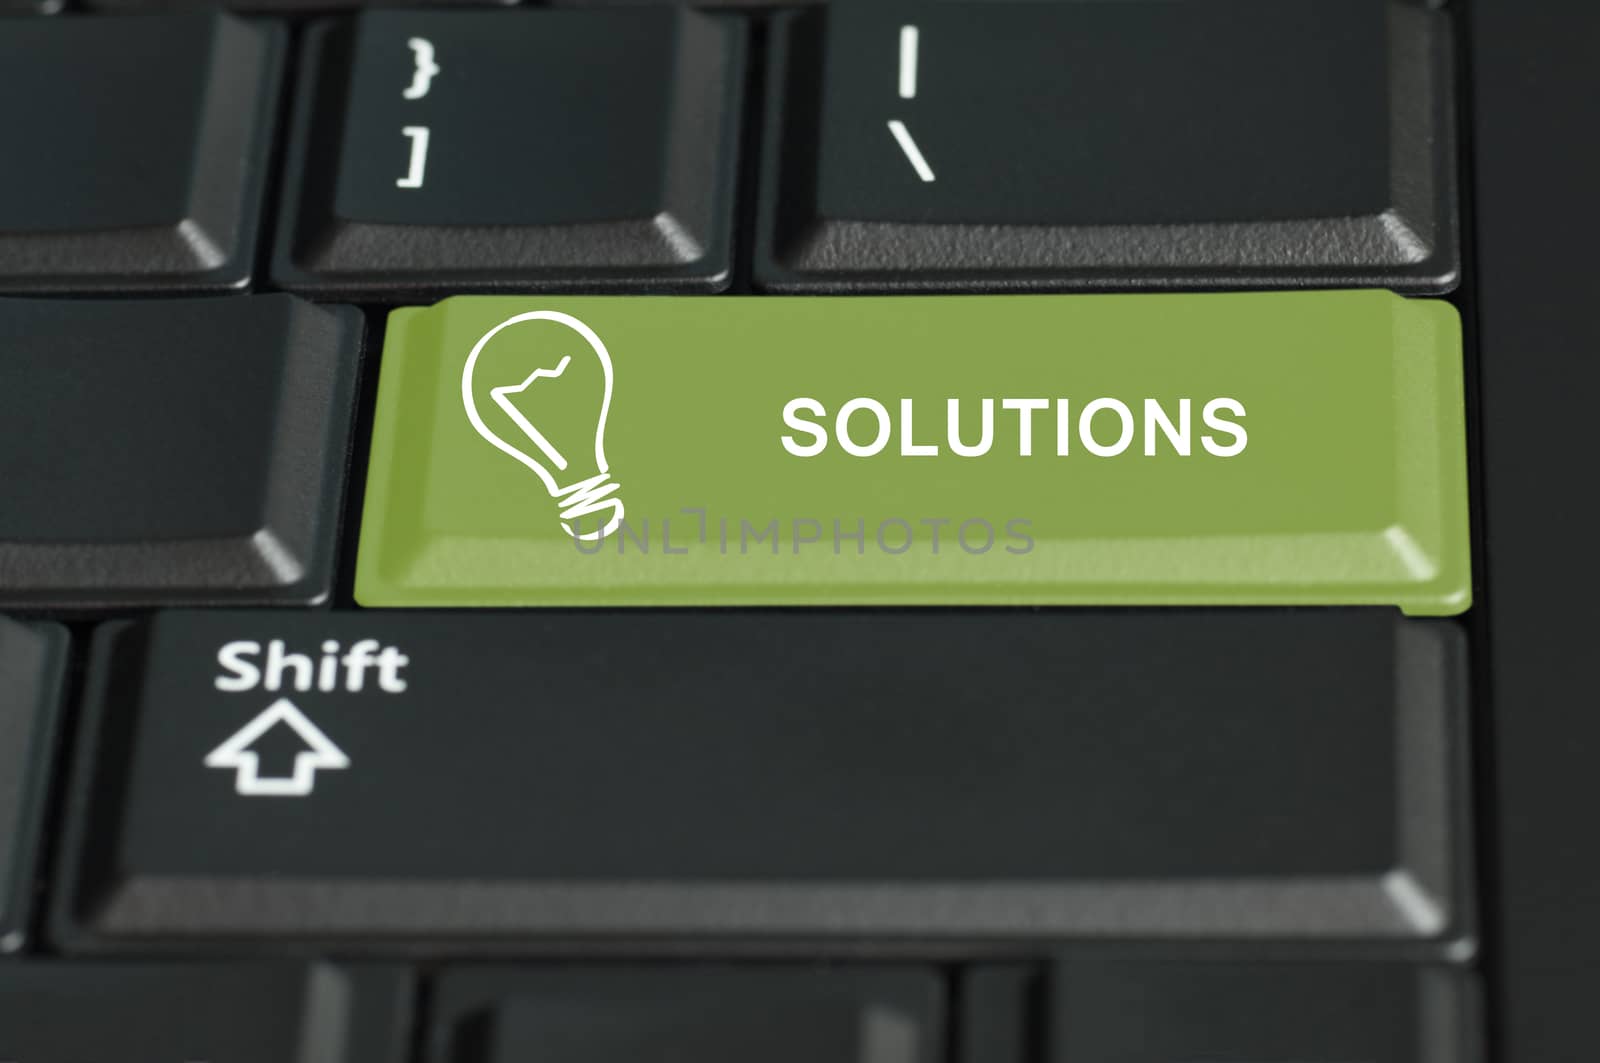 Shift to Solutions  button on enter key by daoleduc